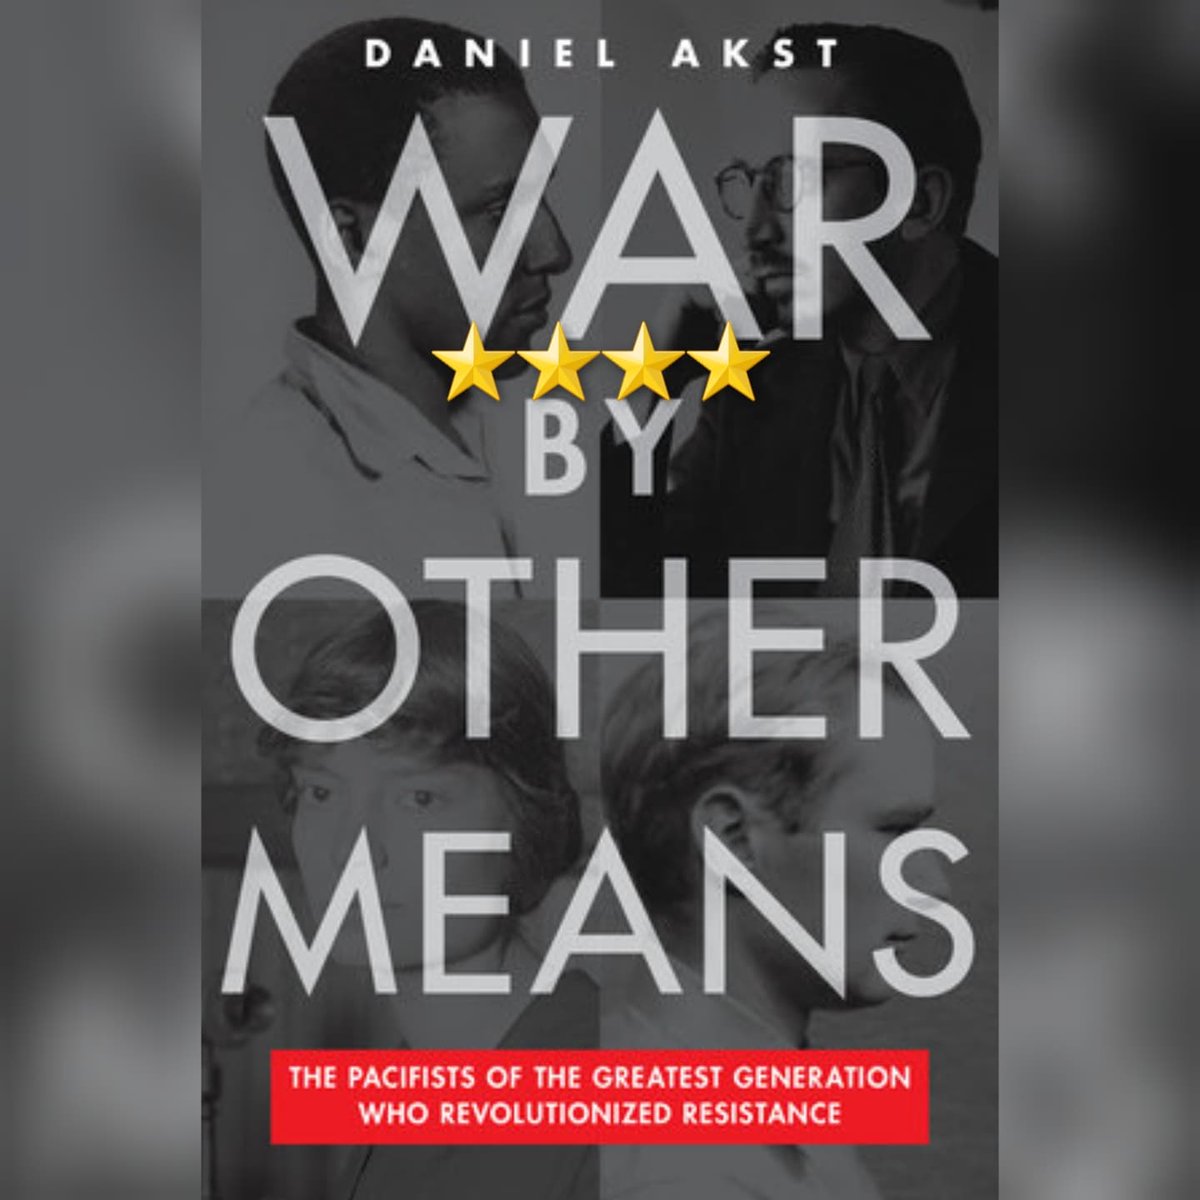 #BookReview: War By Other Means by @DanAkst (via @MelvilleHouse). #WWII Like You've Never Seen It Before. #amreading #nonfiction #pacifism #anarchism #personalism #libertarianism #civilrights #Vietnam #Holocaust #conscientiousobjector #noninterventionism bookanon.com/2022/10/20/boo…